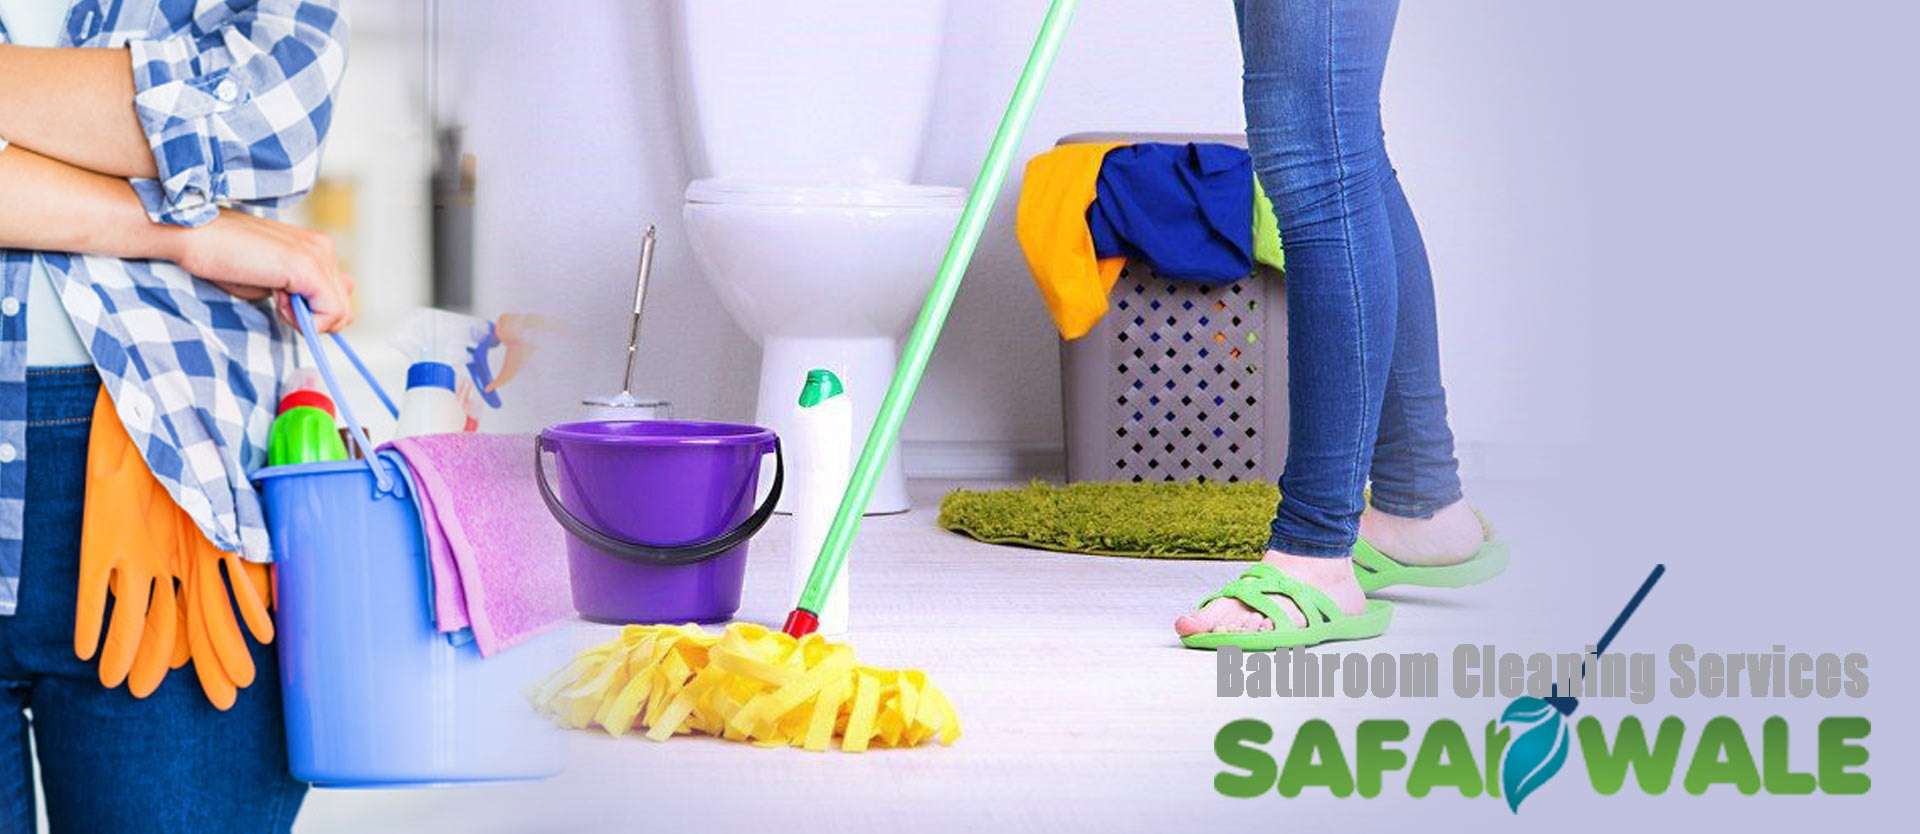 Bathroom Cleaning Services In Sector 81 Noida